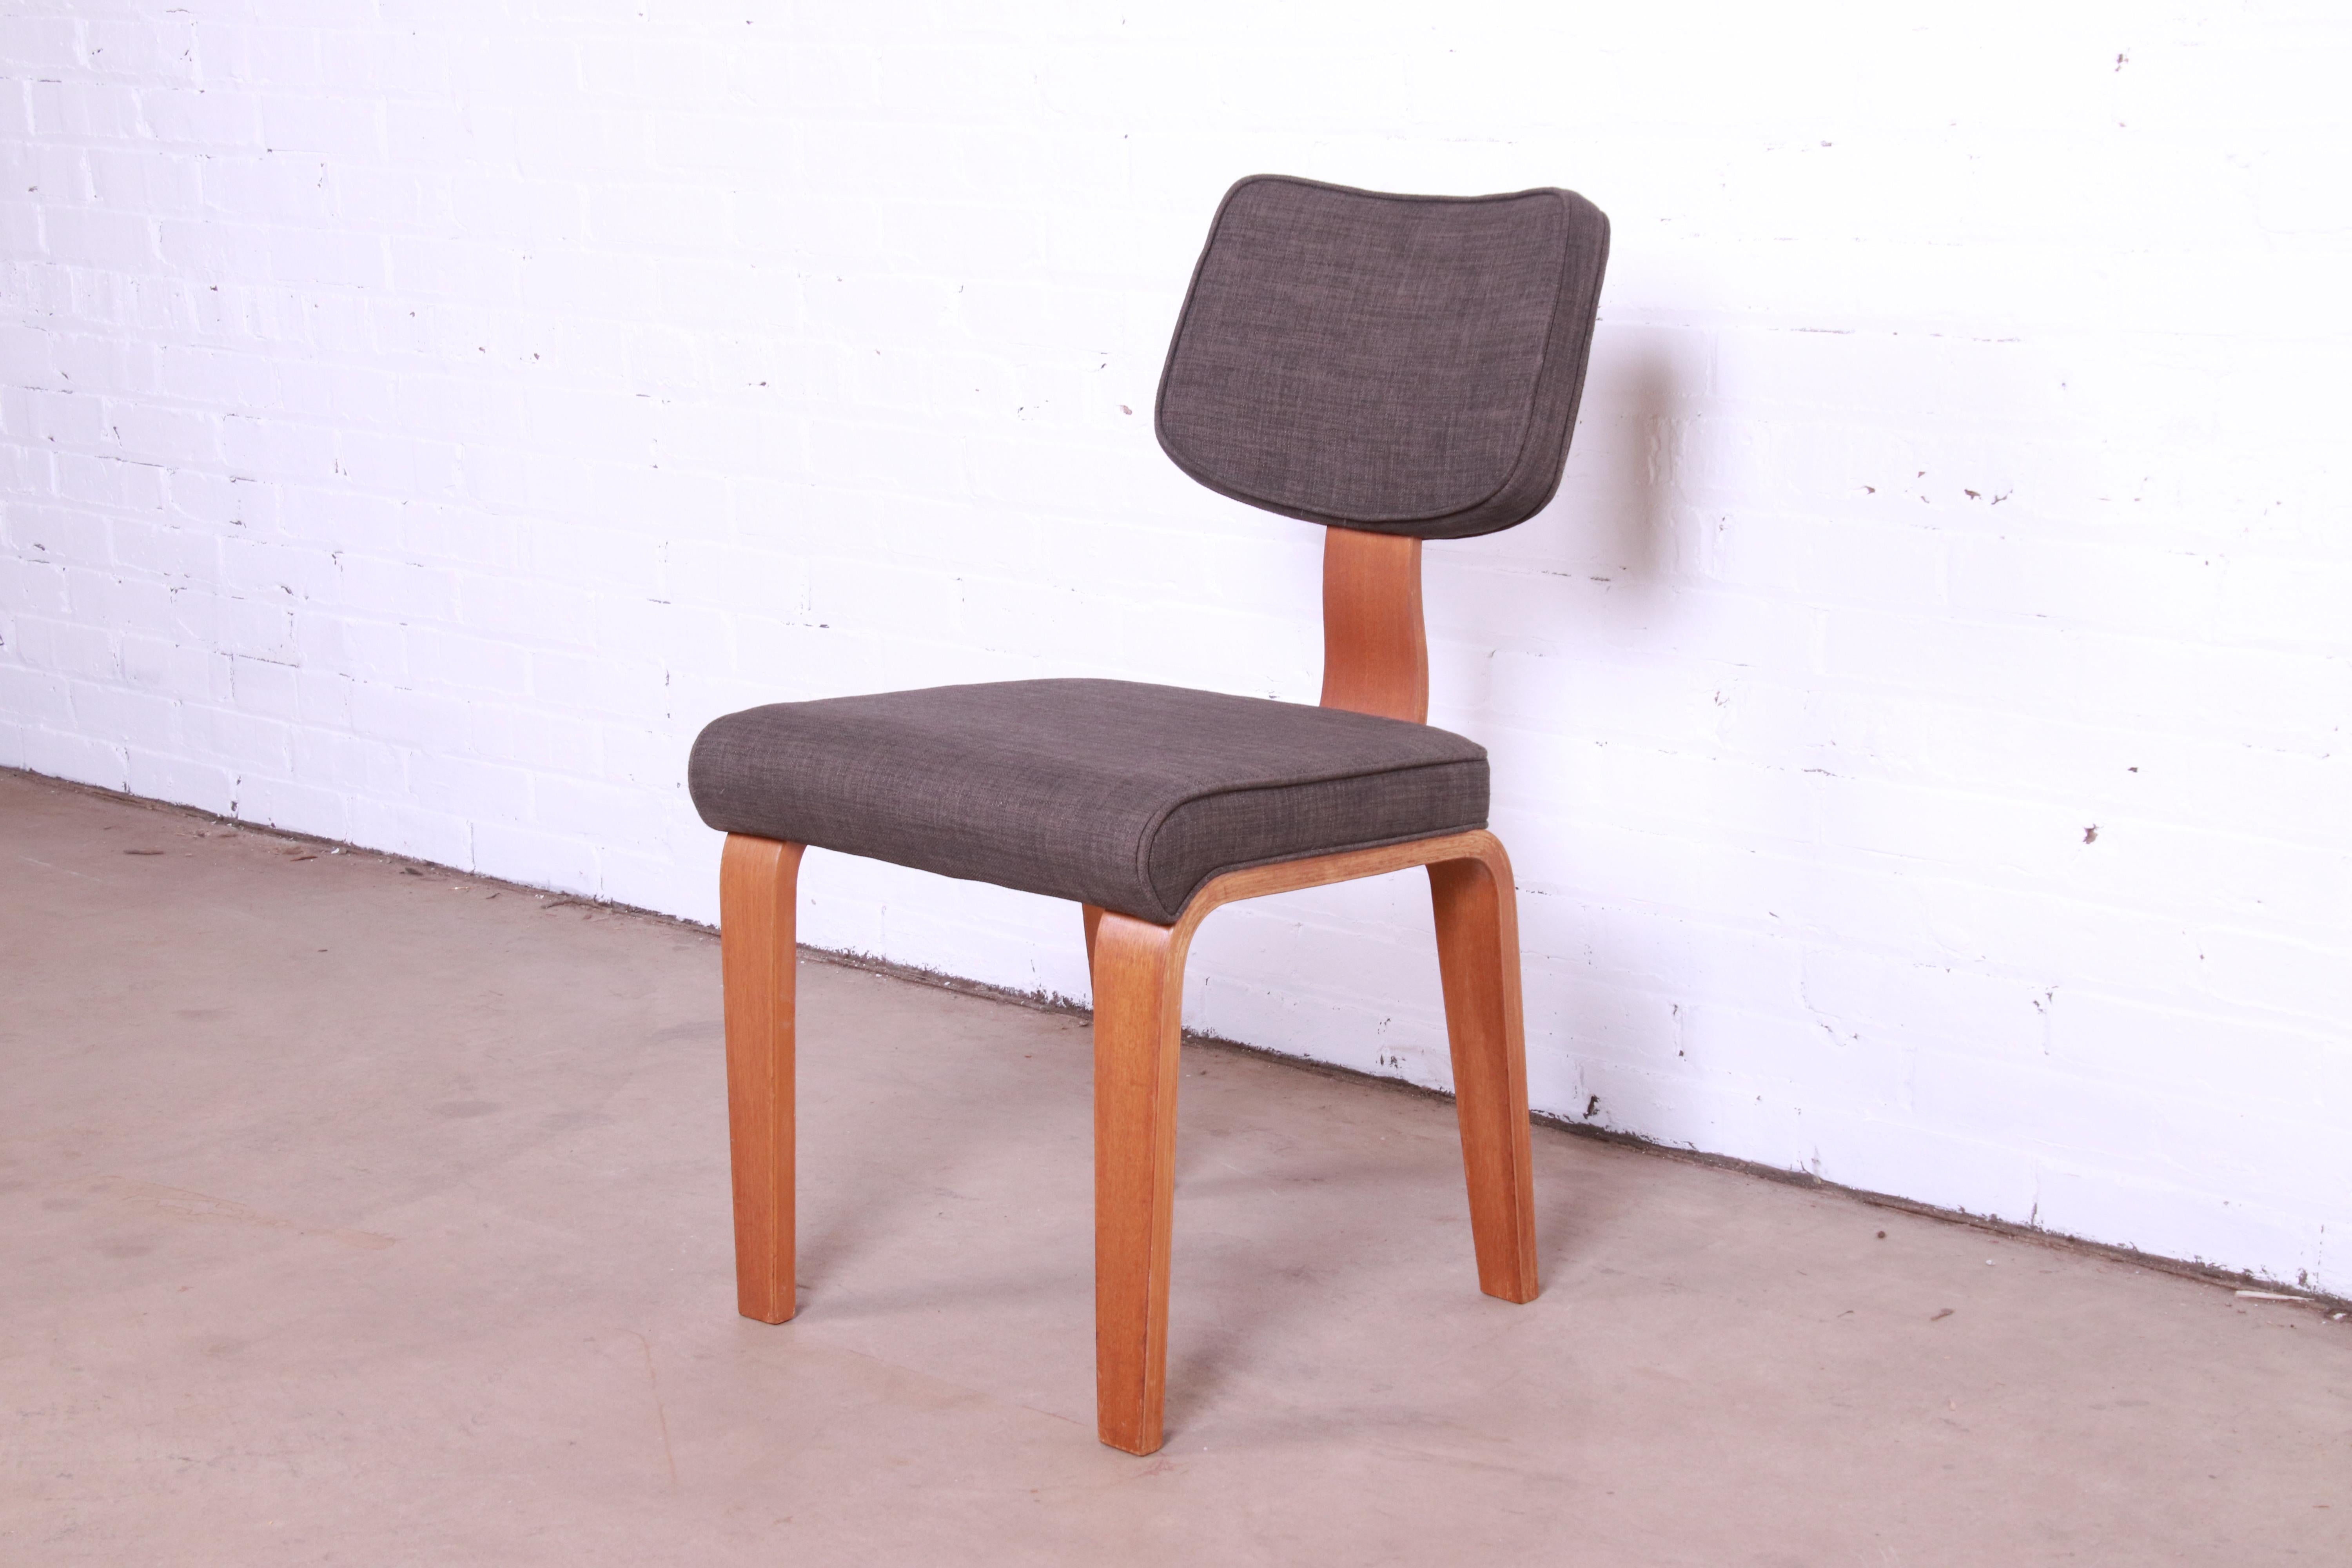 Mid-20th Century Thonet Mid-Century Modern Bentwood Desk Chair or Side Chair, 1950s